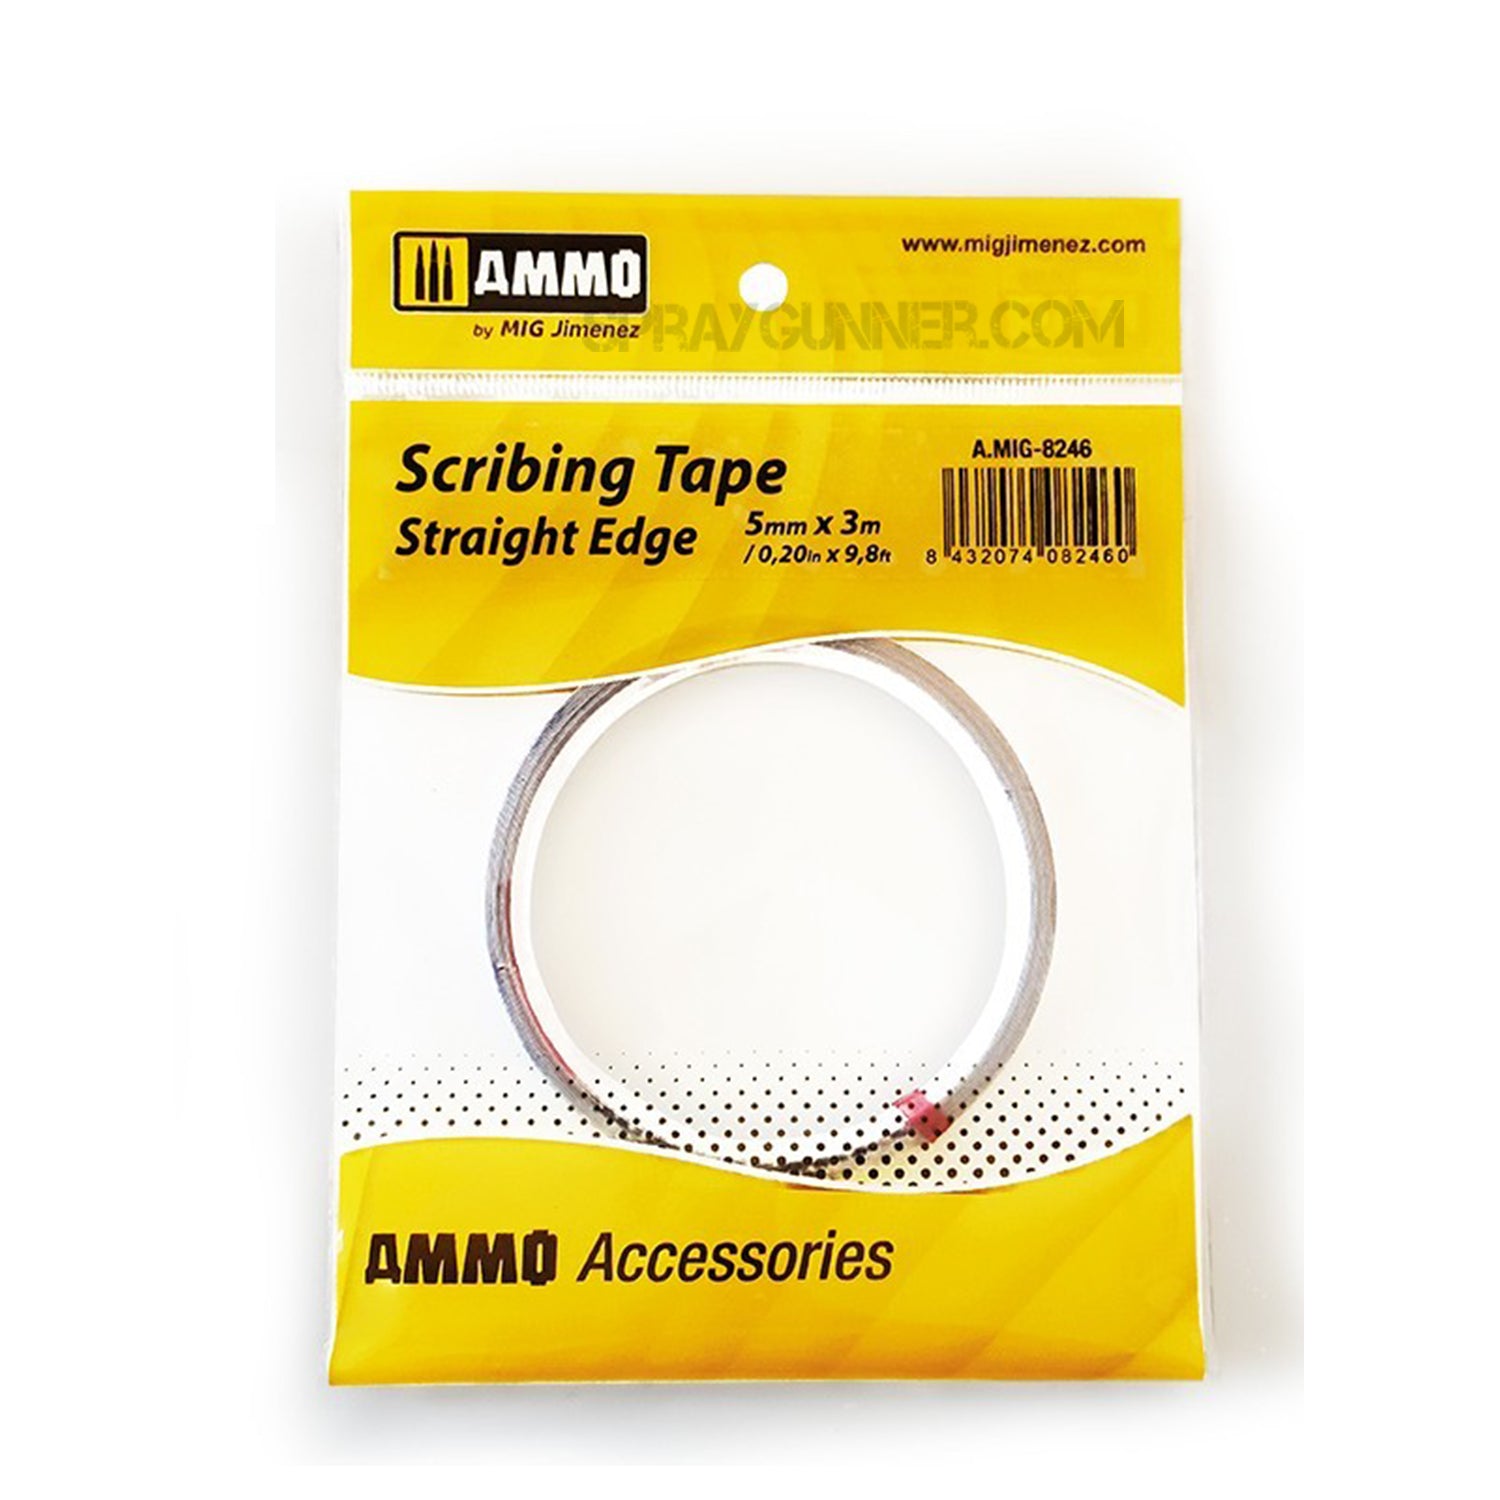 AMMO by MIG Accessories Scribing Tape - Straight Edge (5mm x 3M) AMMO by Mig Jimenez